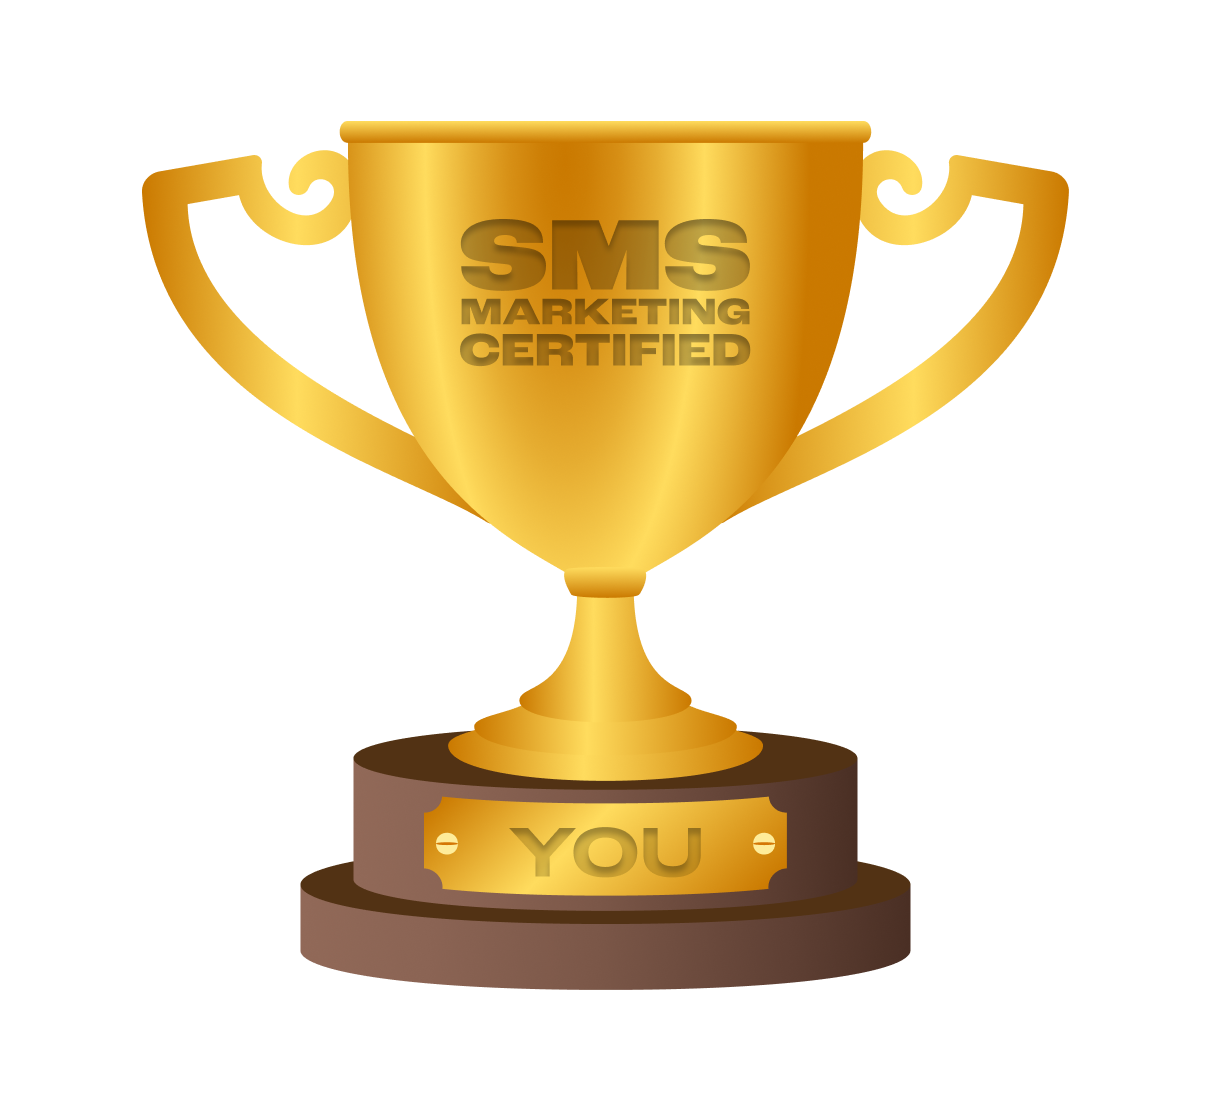 The SMS Marketing Certification